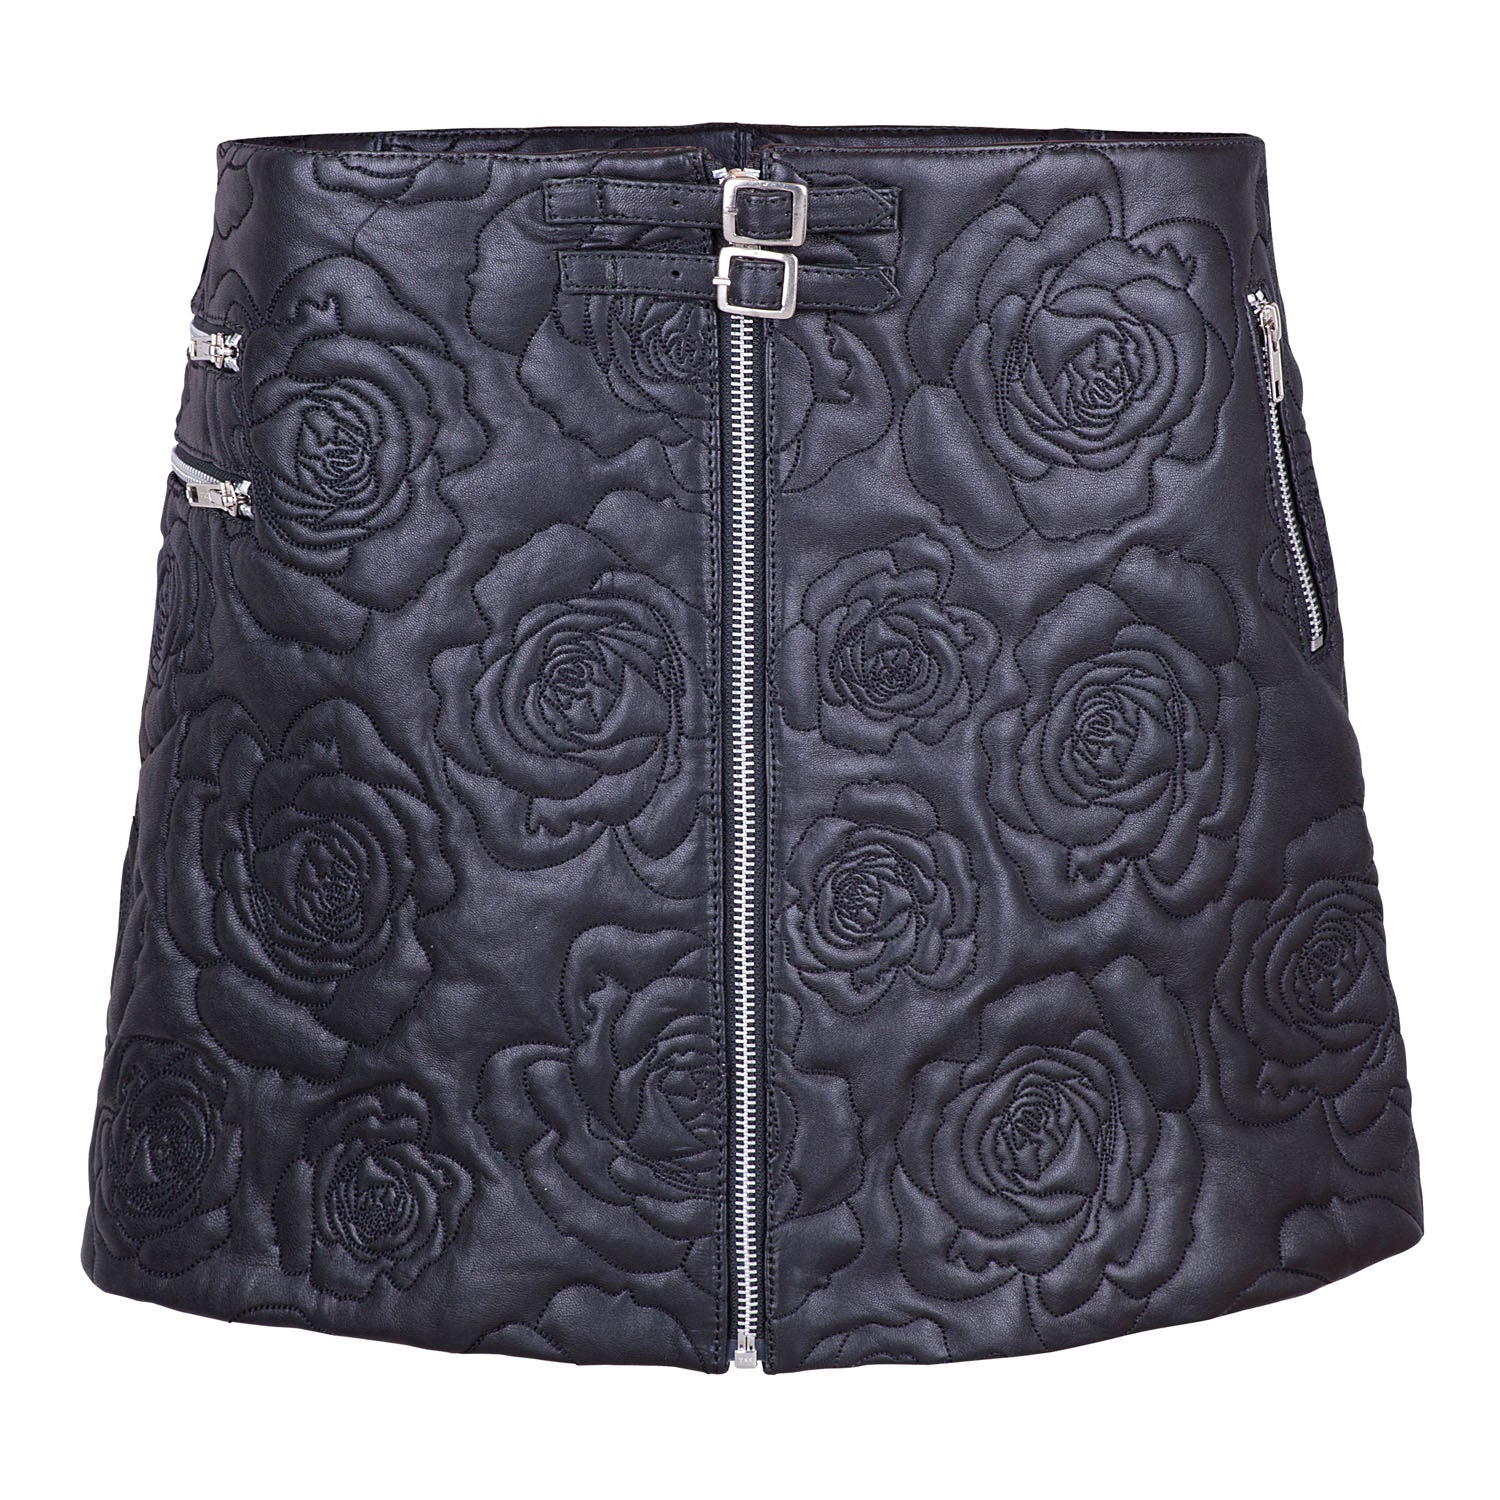 Roses In Silver Vases Embroidered Leather Skirt